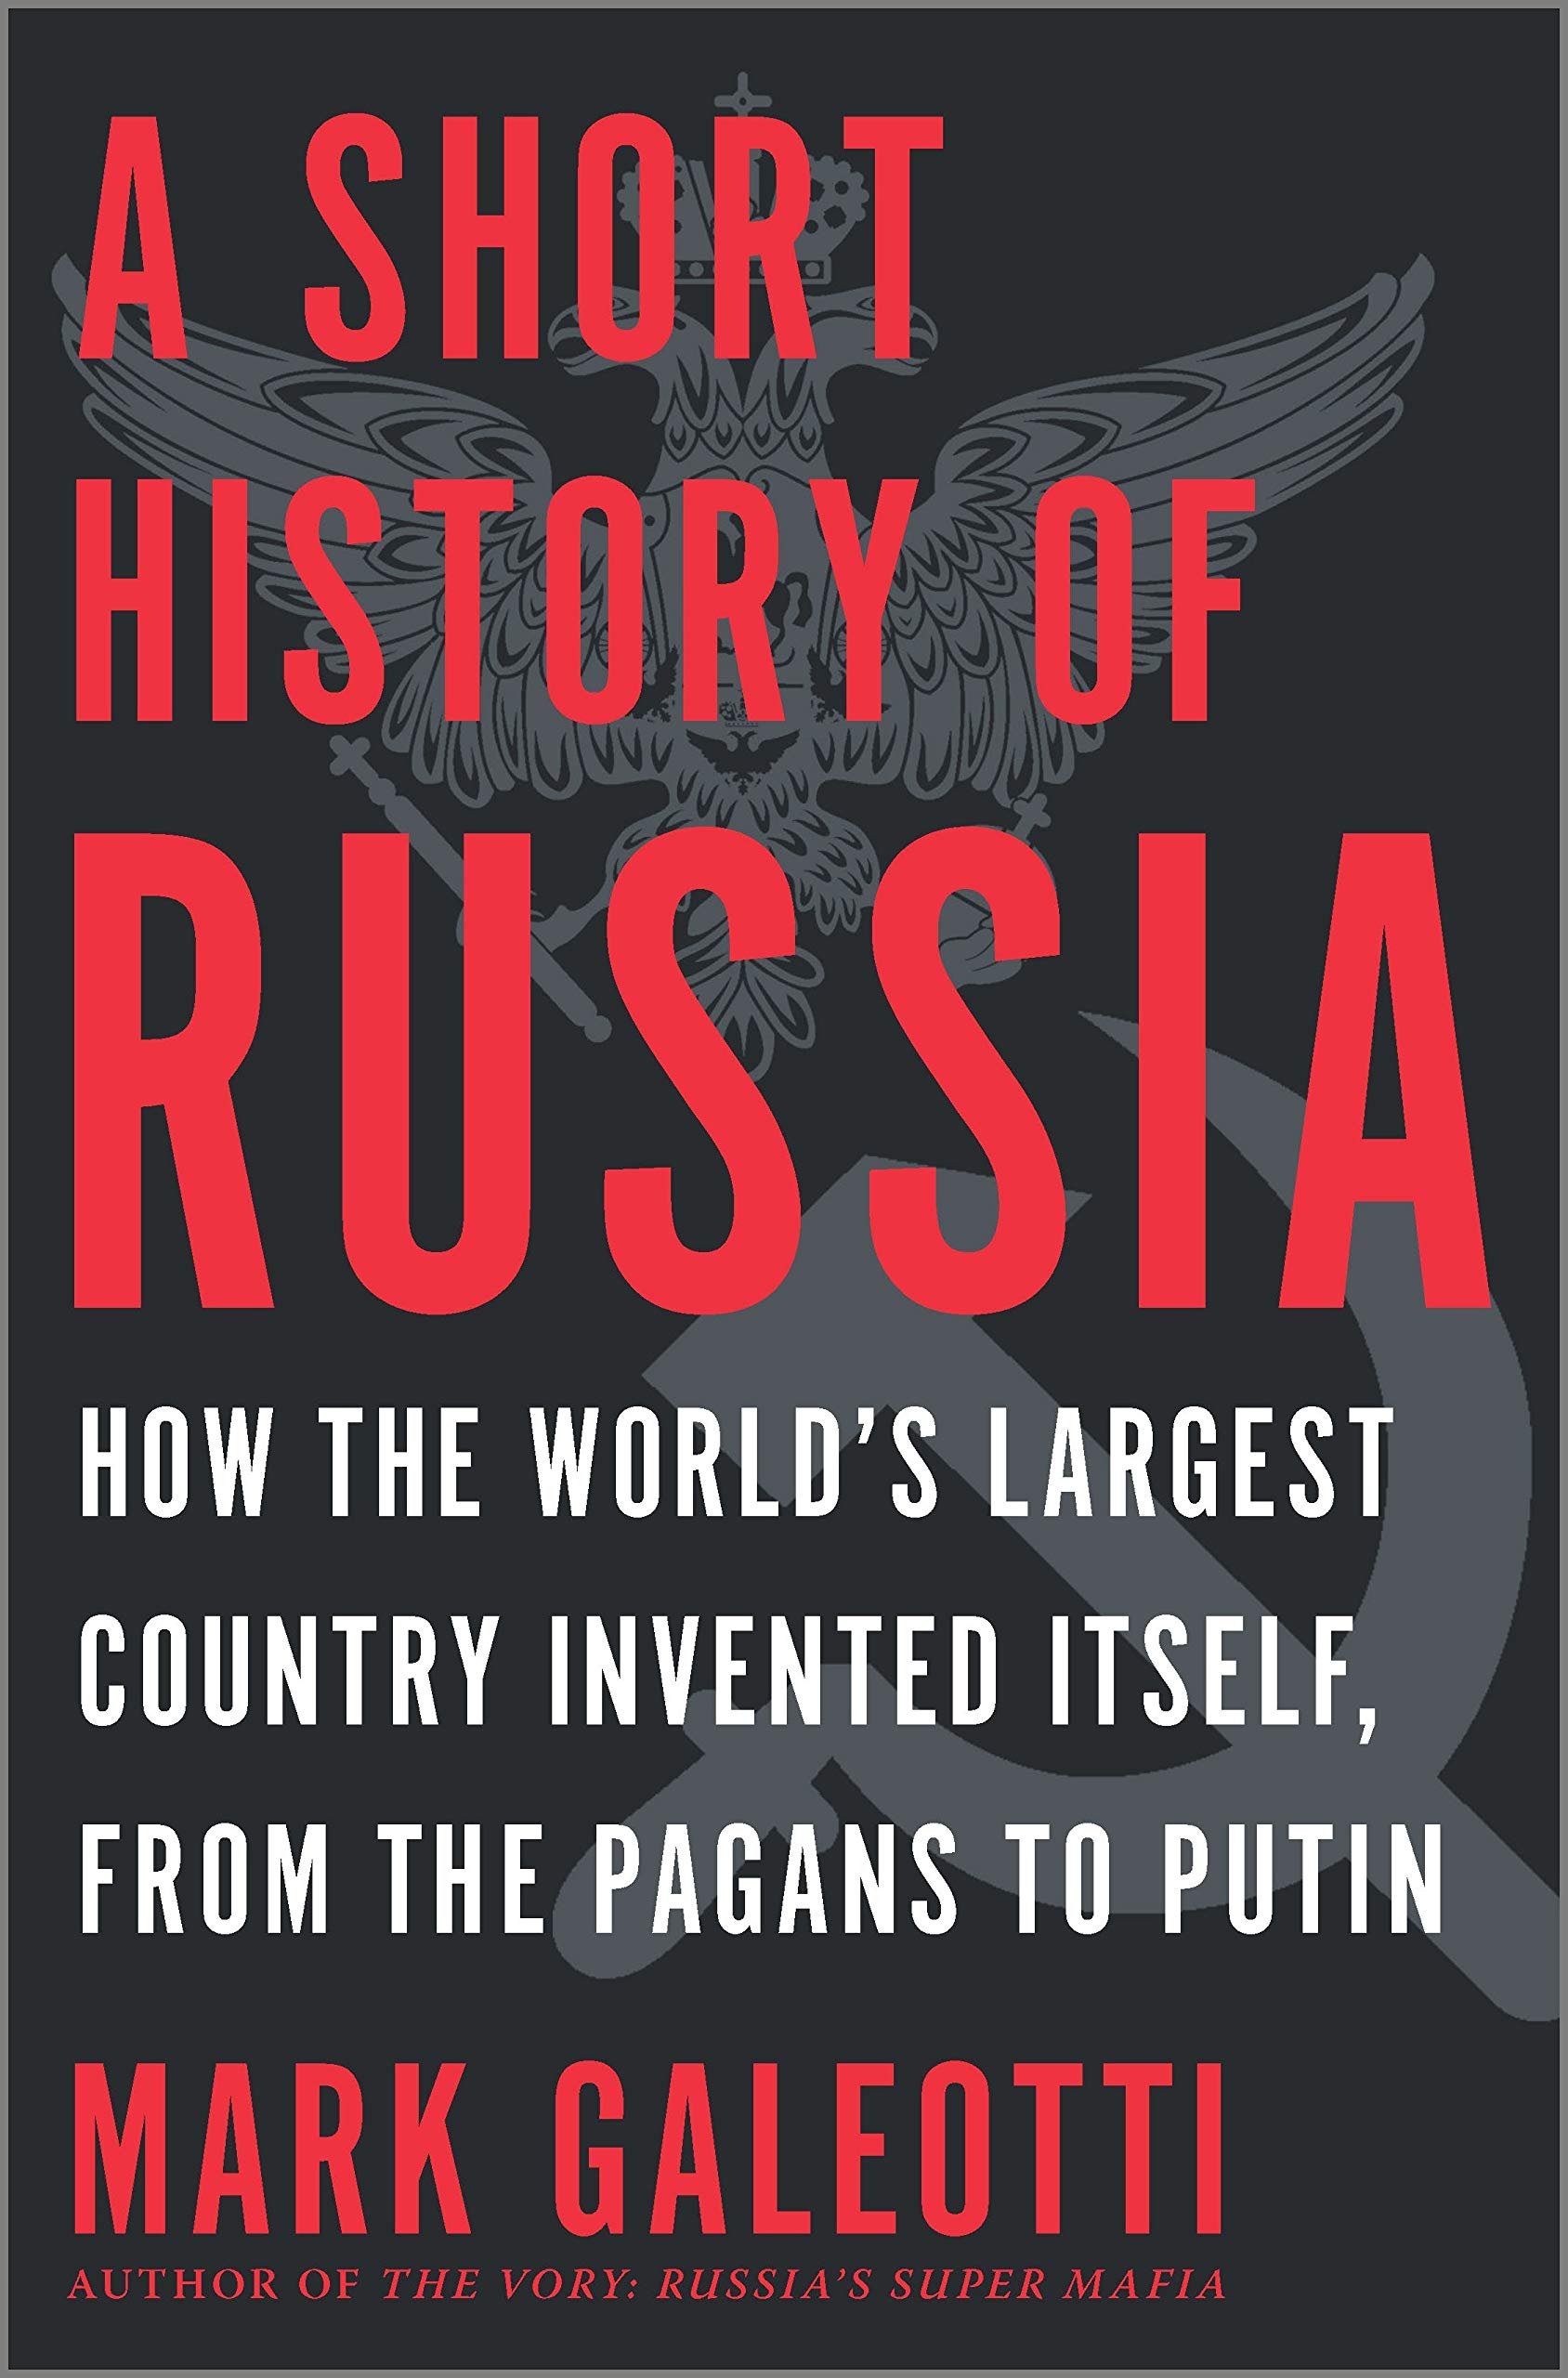 A Short History of Russia: How the World’s Largest Country Invented Itself, From The Pagans to Putin